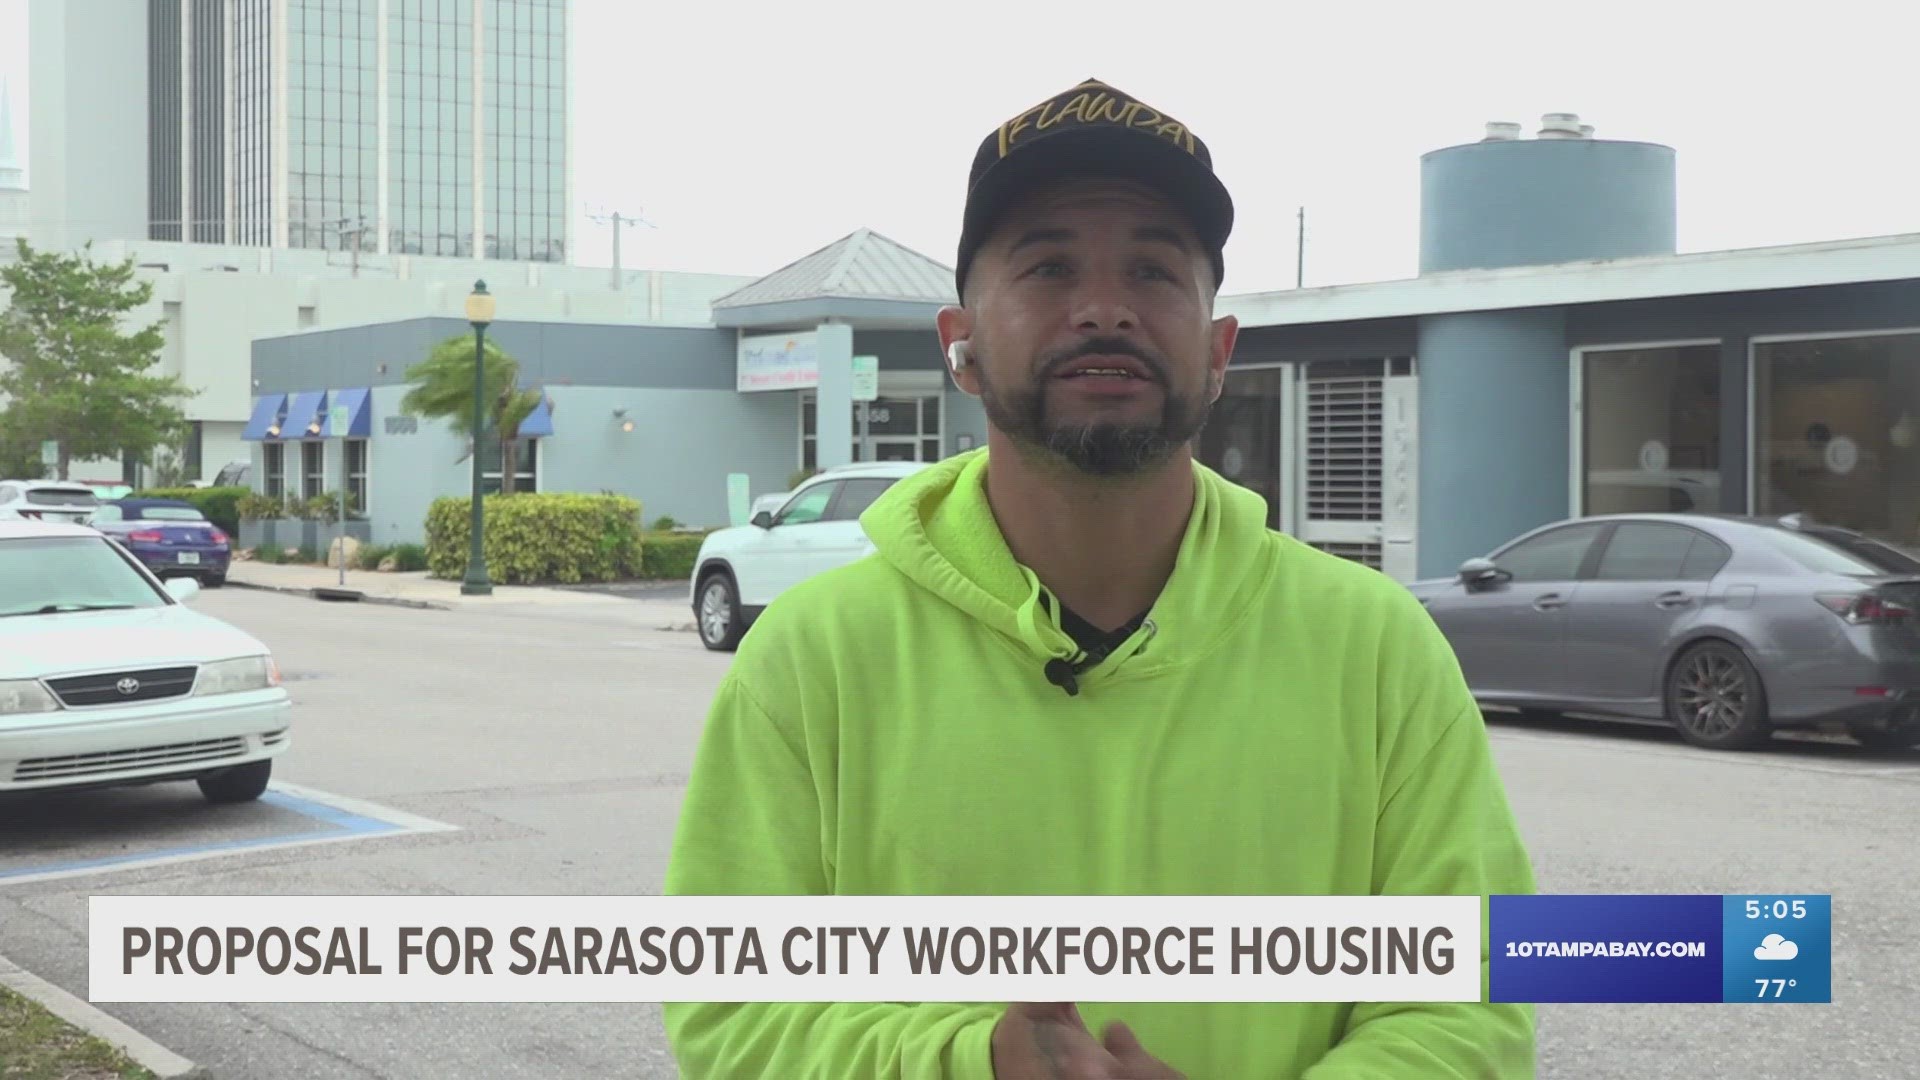 Sarasota City Manager Marlon Brown says the affordable housing situation in the city remains desperate.